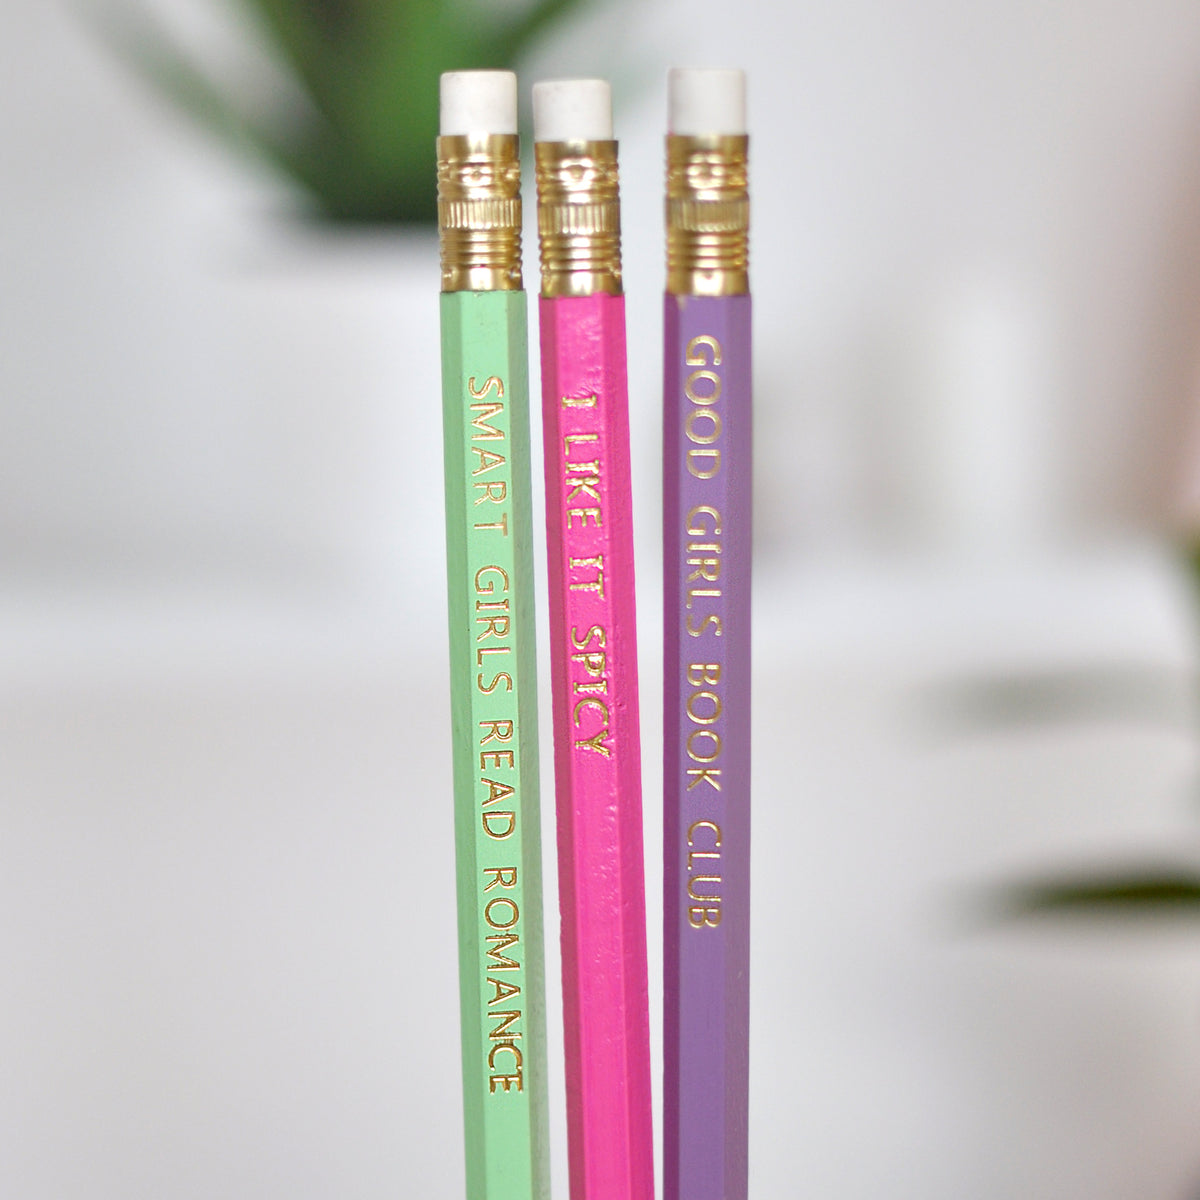 Three Pencils and Bookmark Set for Romance Readers - Smart Girls Read Romance, I Like It Spicy, Good Girls Book Club foil stamped pencils